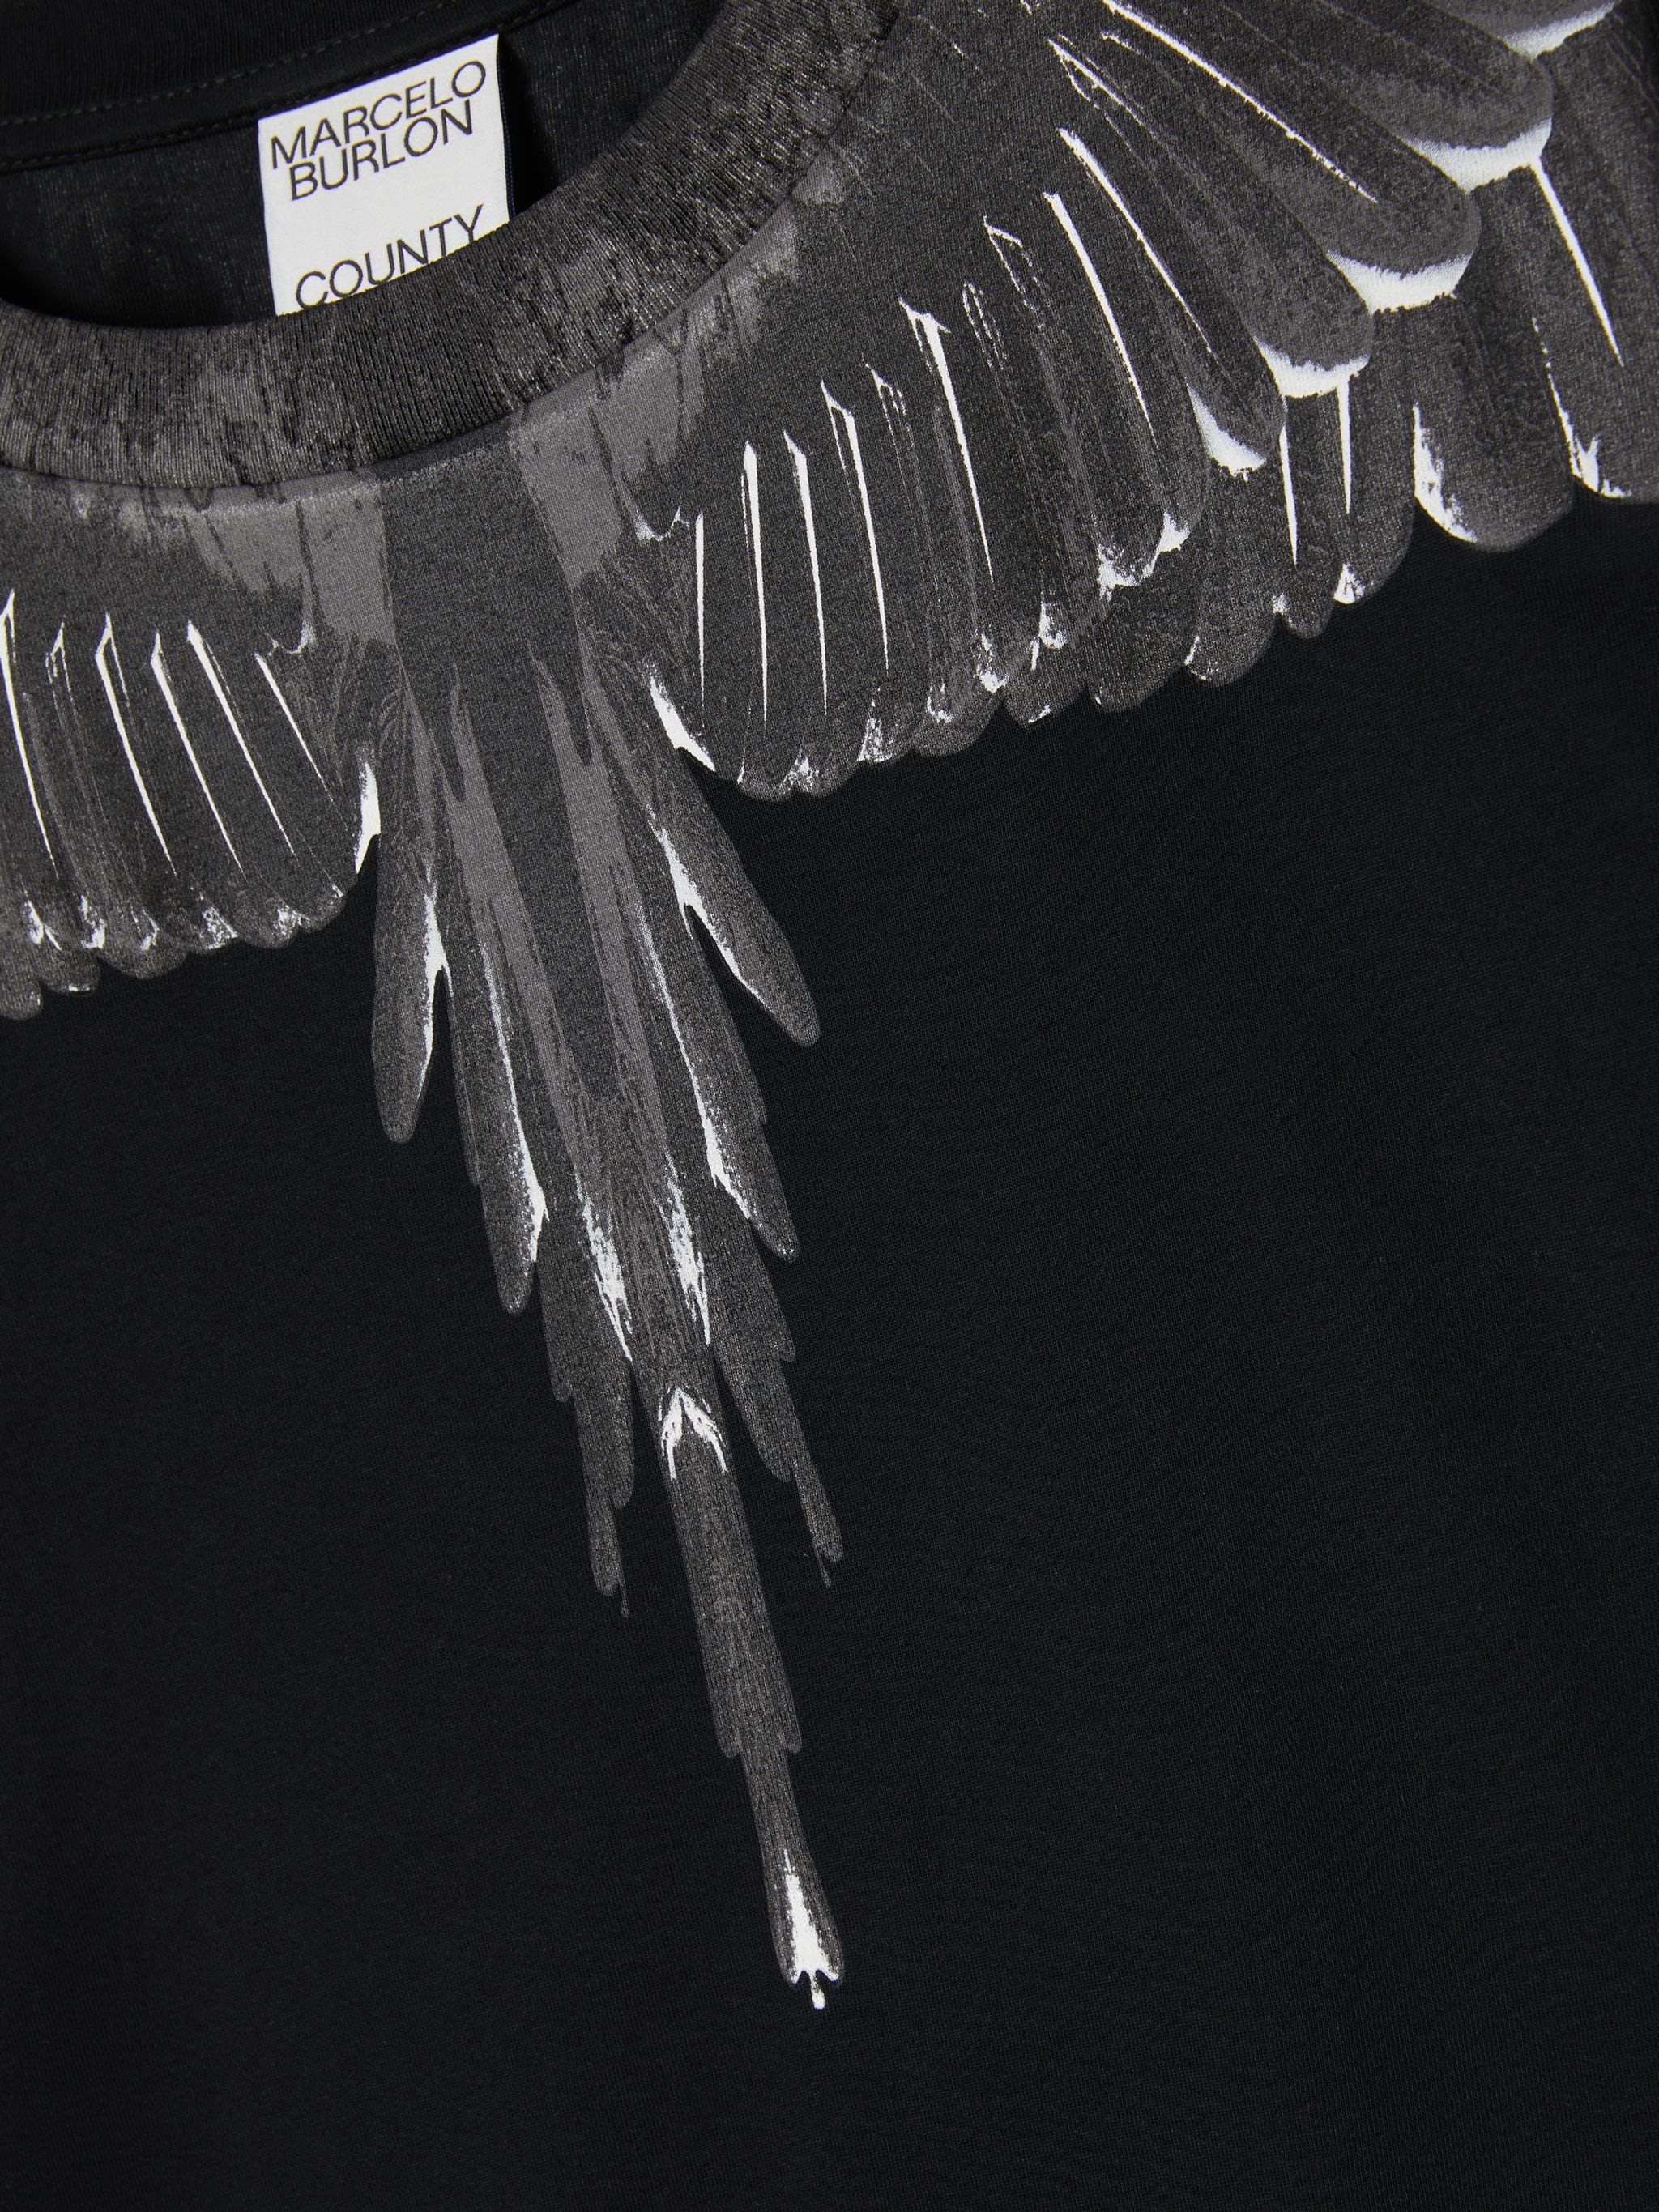 Wings-print cotton T-shirt from Marcelo Burlon County of Milan featuring black, signature Marcelo Burlon Wings print, round neck, short sleeves, straight hem and cotton. Conscious: This item is made from at least 50% organic materials.